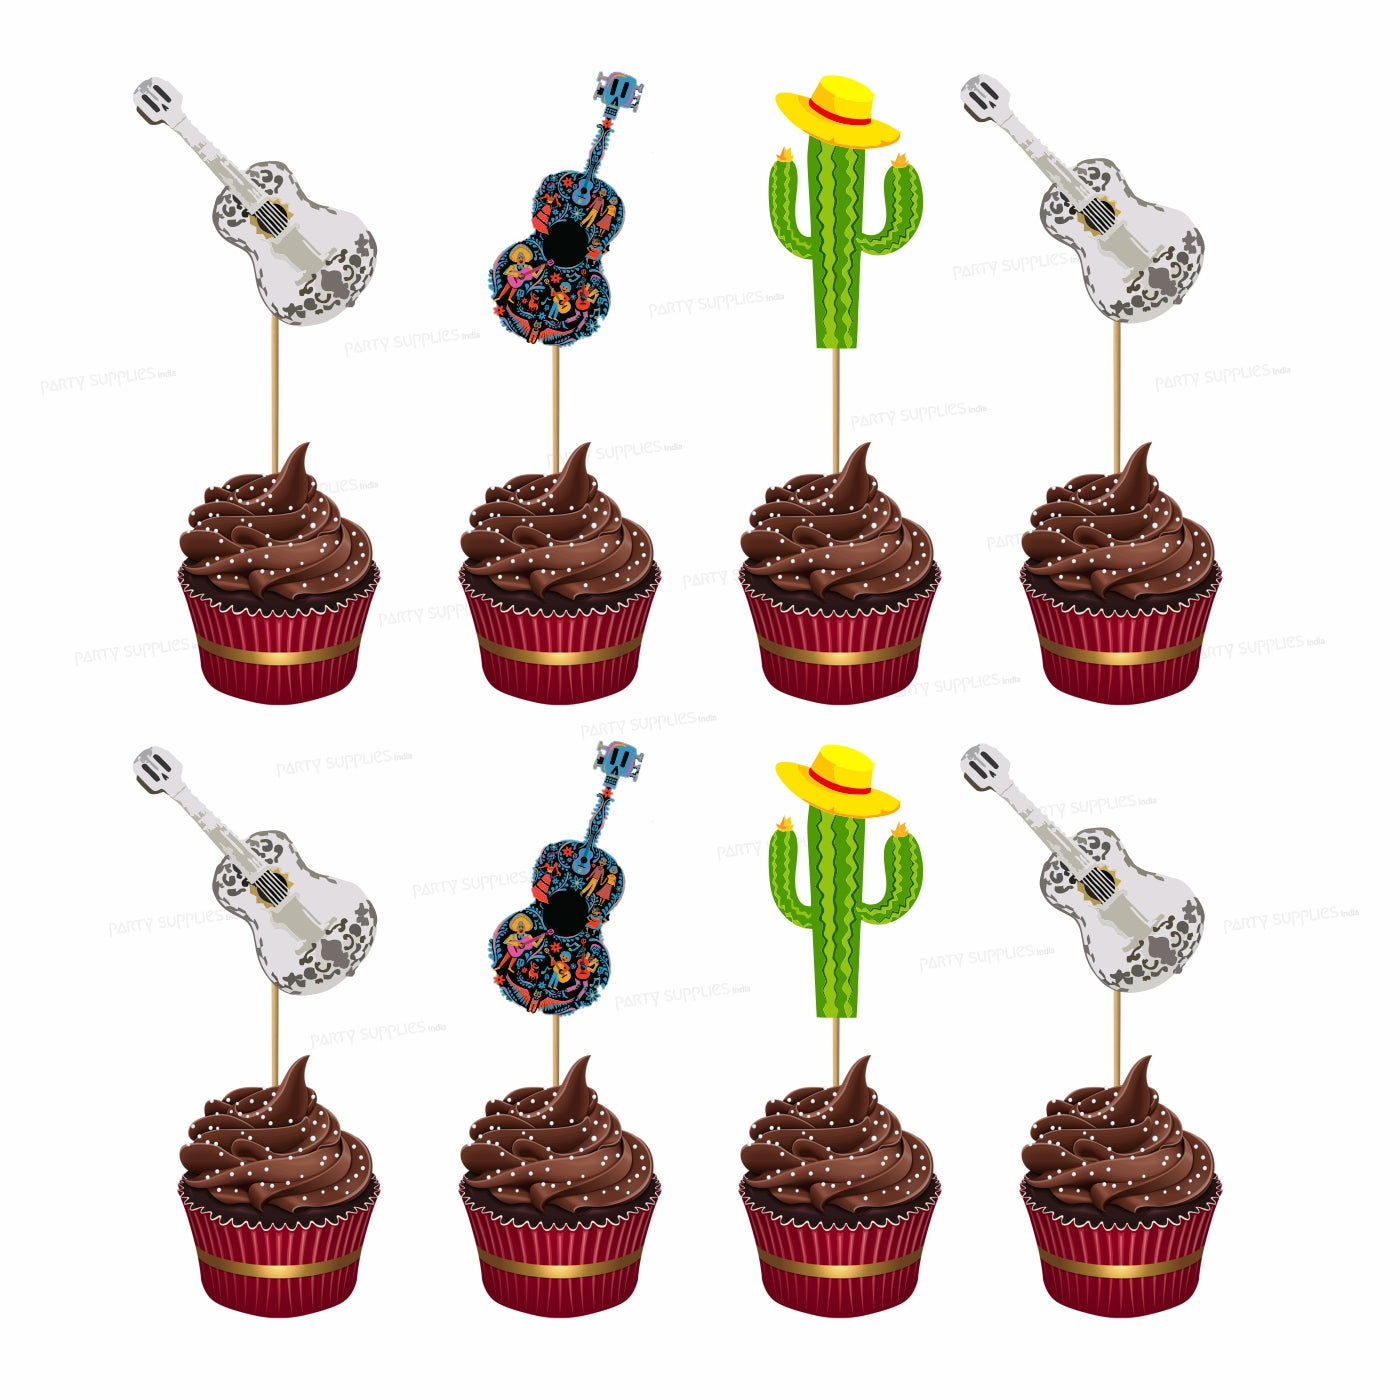 PSI Coco Theme  Customized  Cup Cake Topper